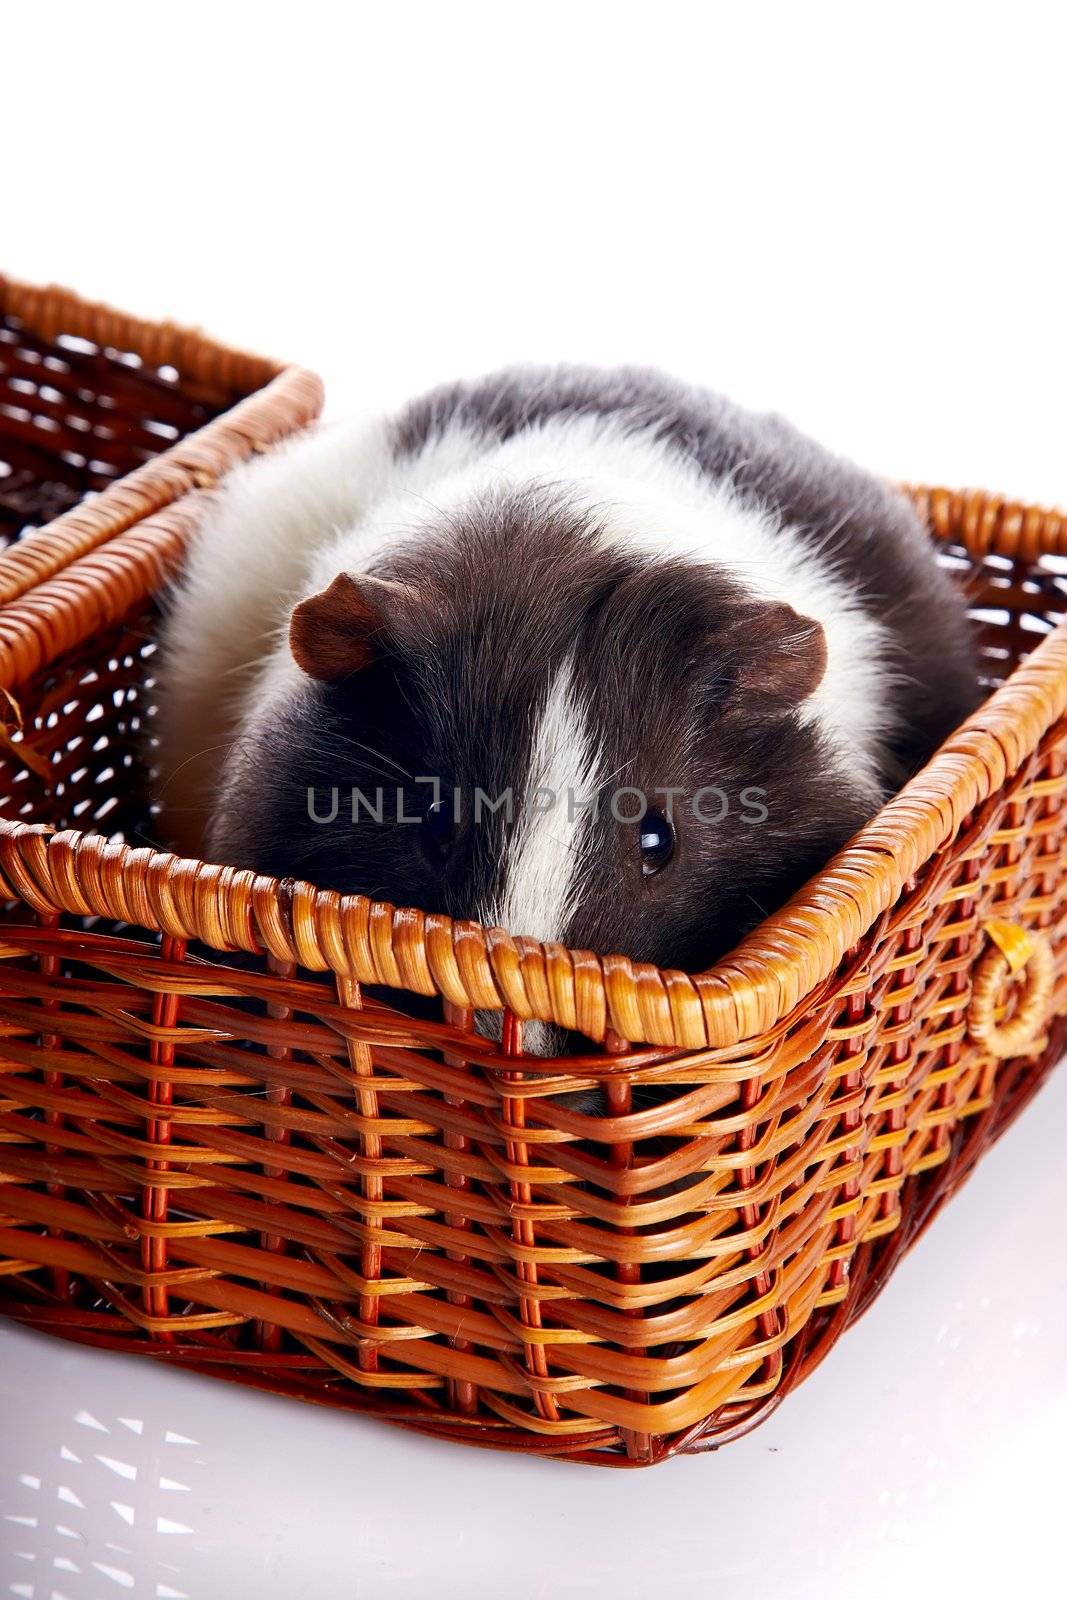 Guinea pig in a wattled basket on a white background